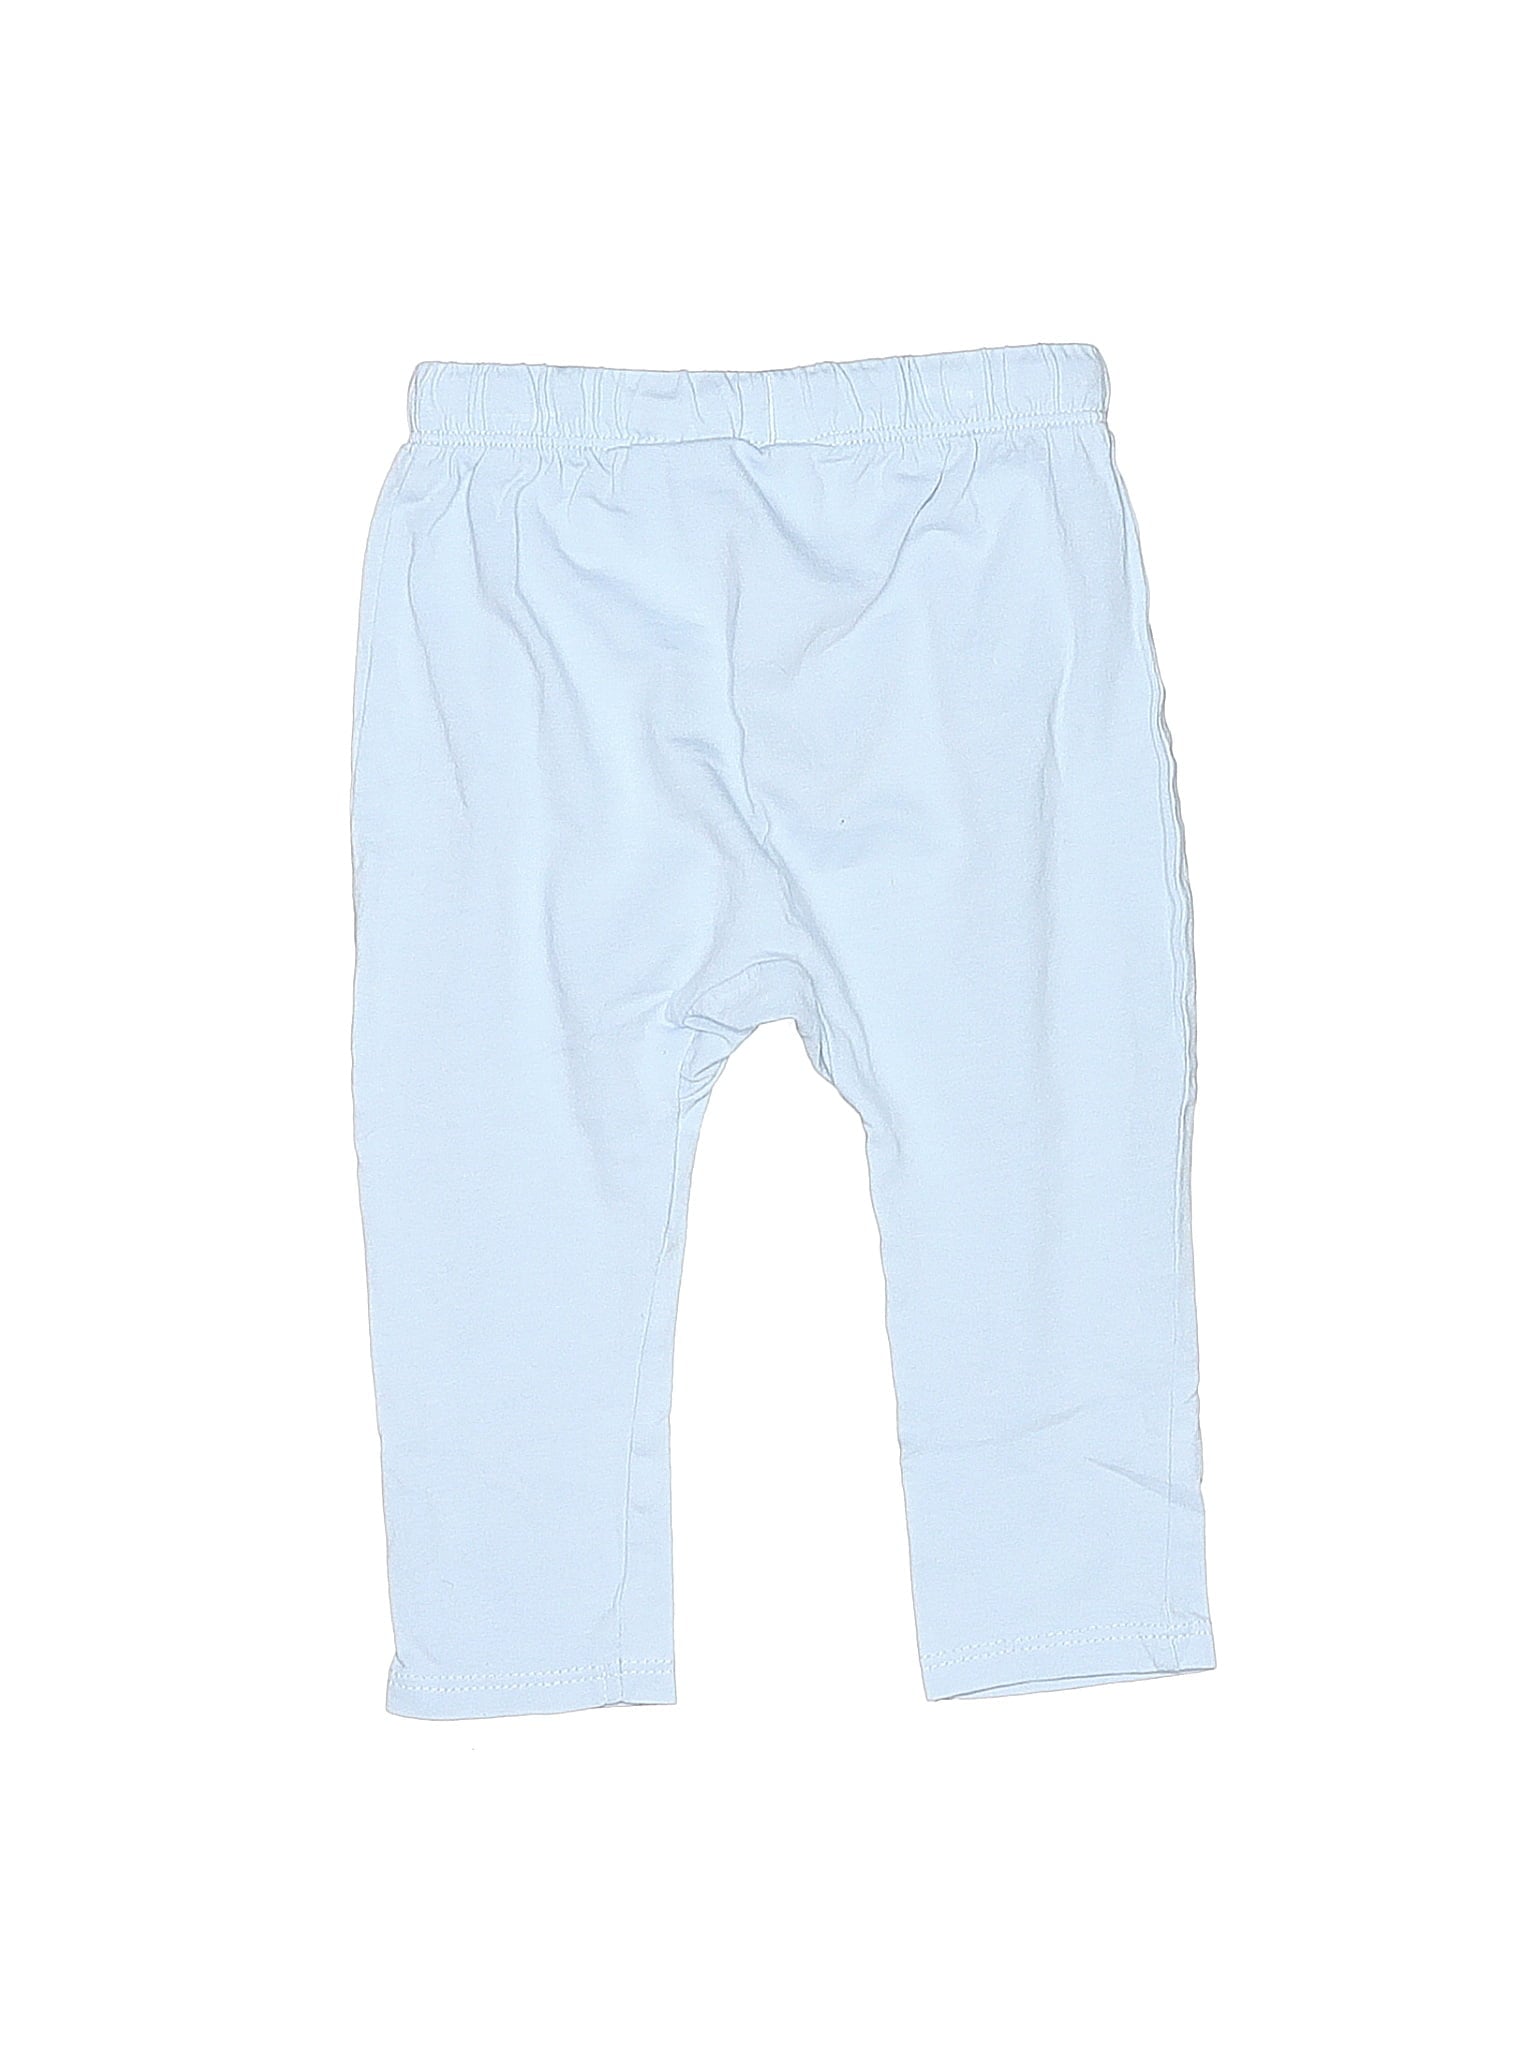 Casual Pants size - 18 mo